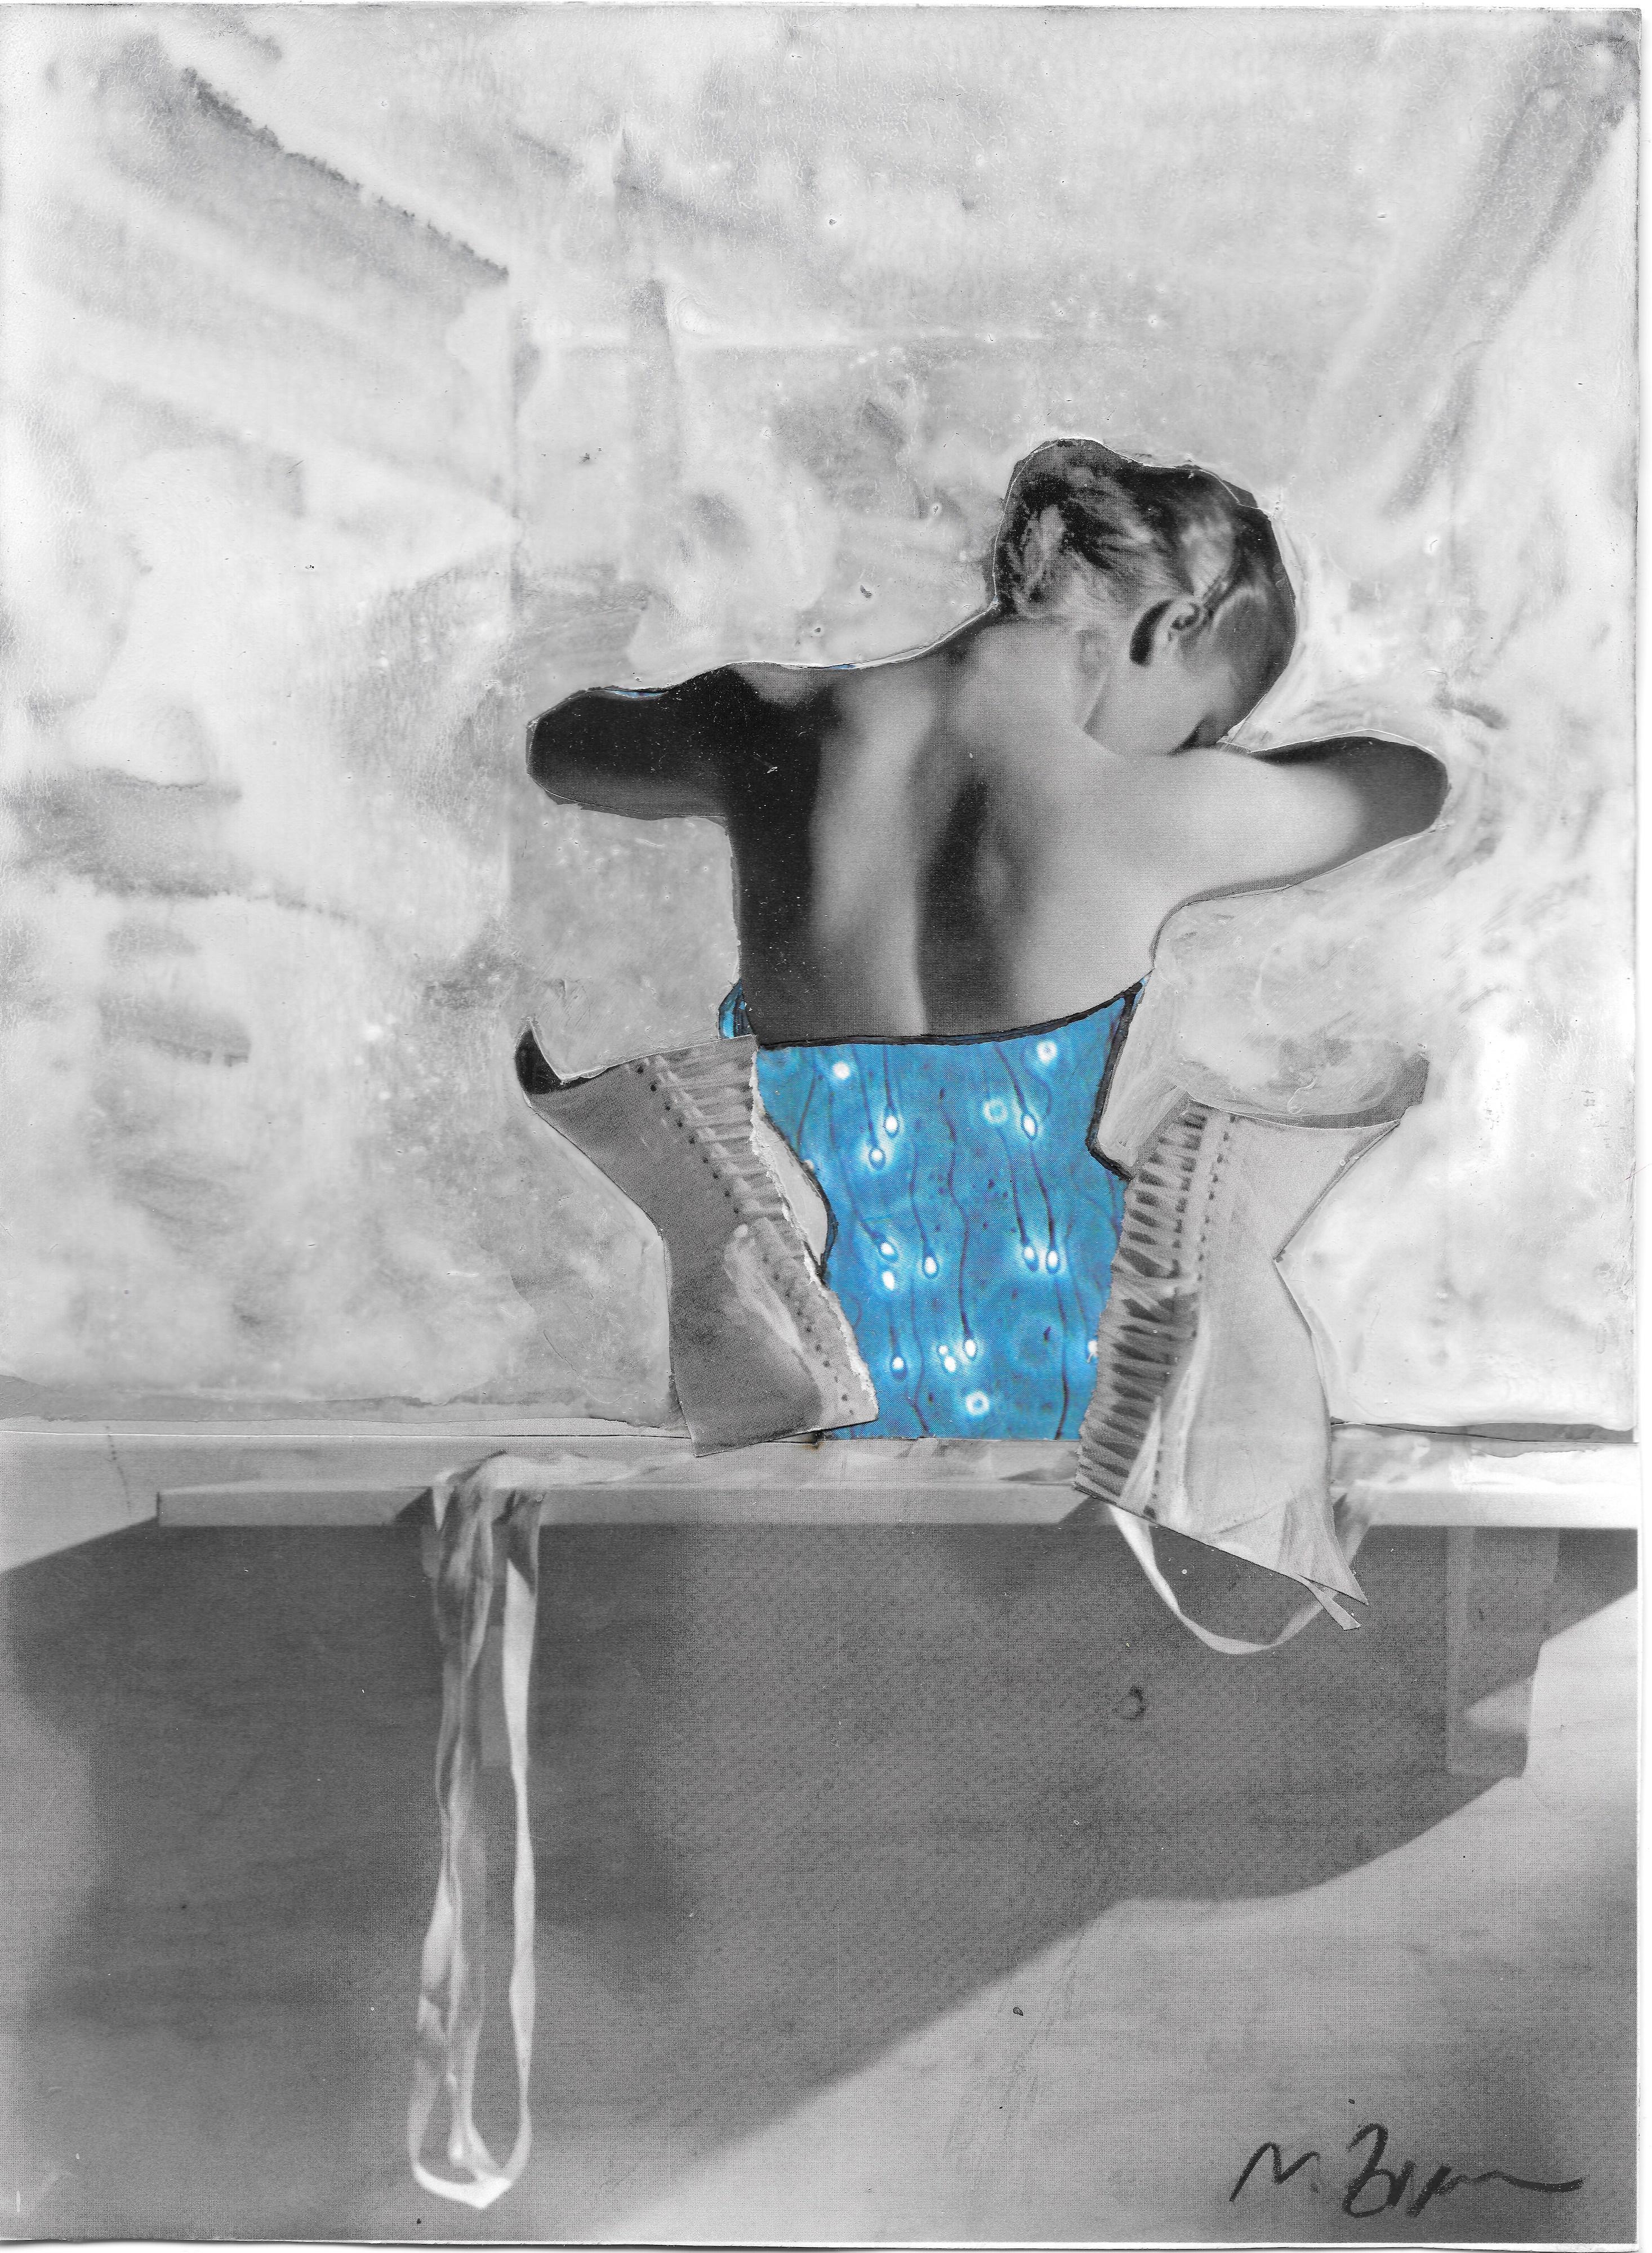 Unbound, #2245. Horst P. Horst  Homage. Limited edition color photograph